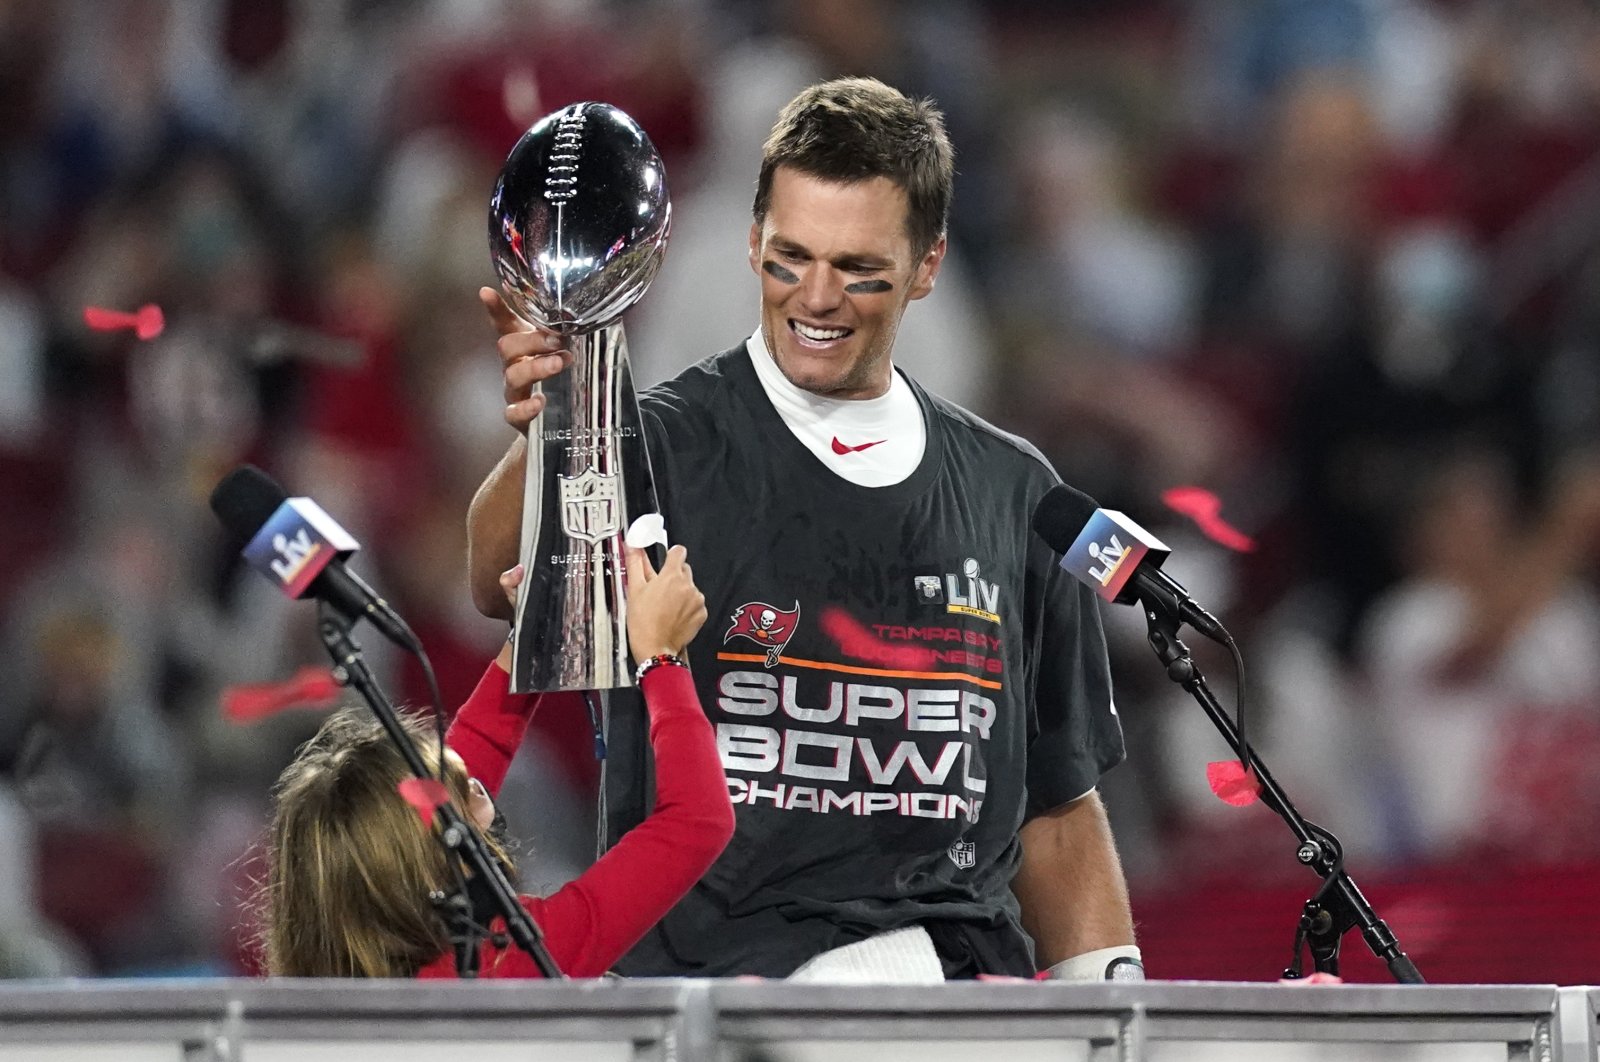 Tampa Bay Buccaneers quarterback Tom Brady celebrates after the NFL Super Bowl 55 against the Kansas City Chiefs, in Tampa, Florida, U.S., Feb. 7, 2021. (AP Photo) 